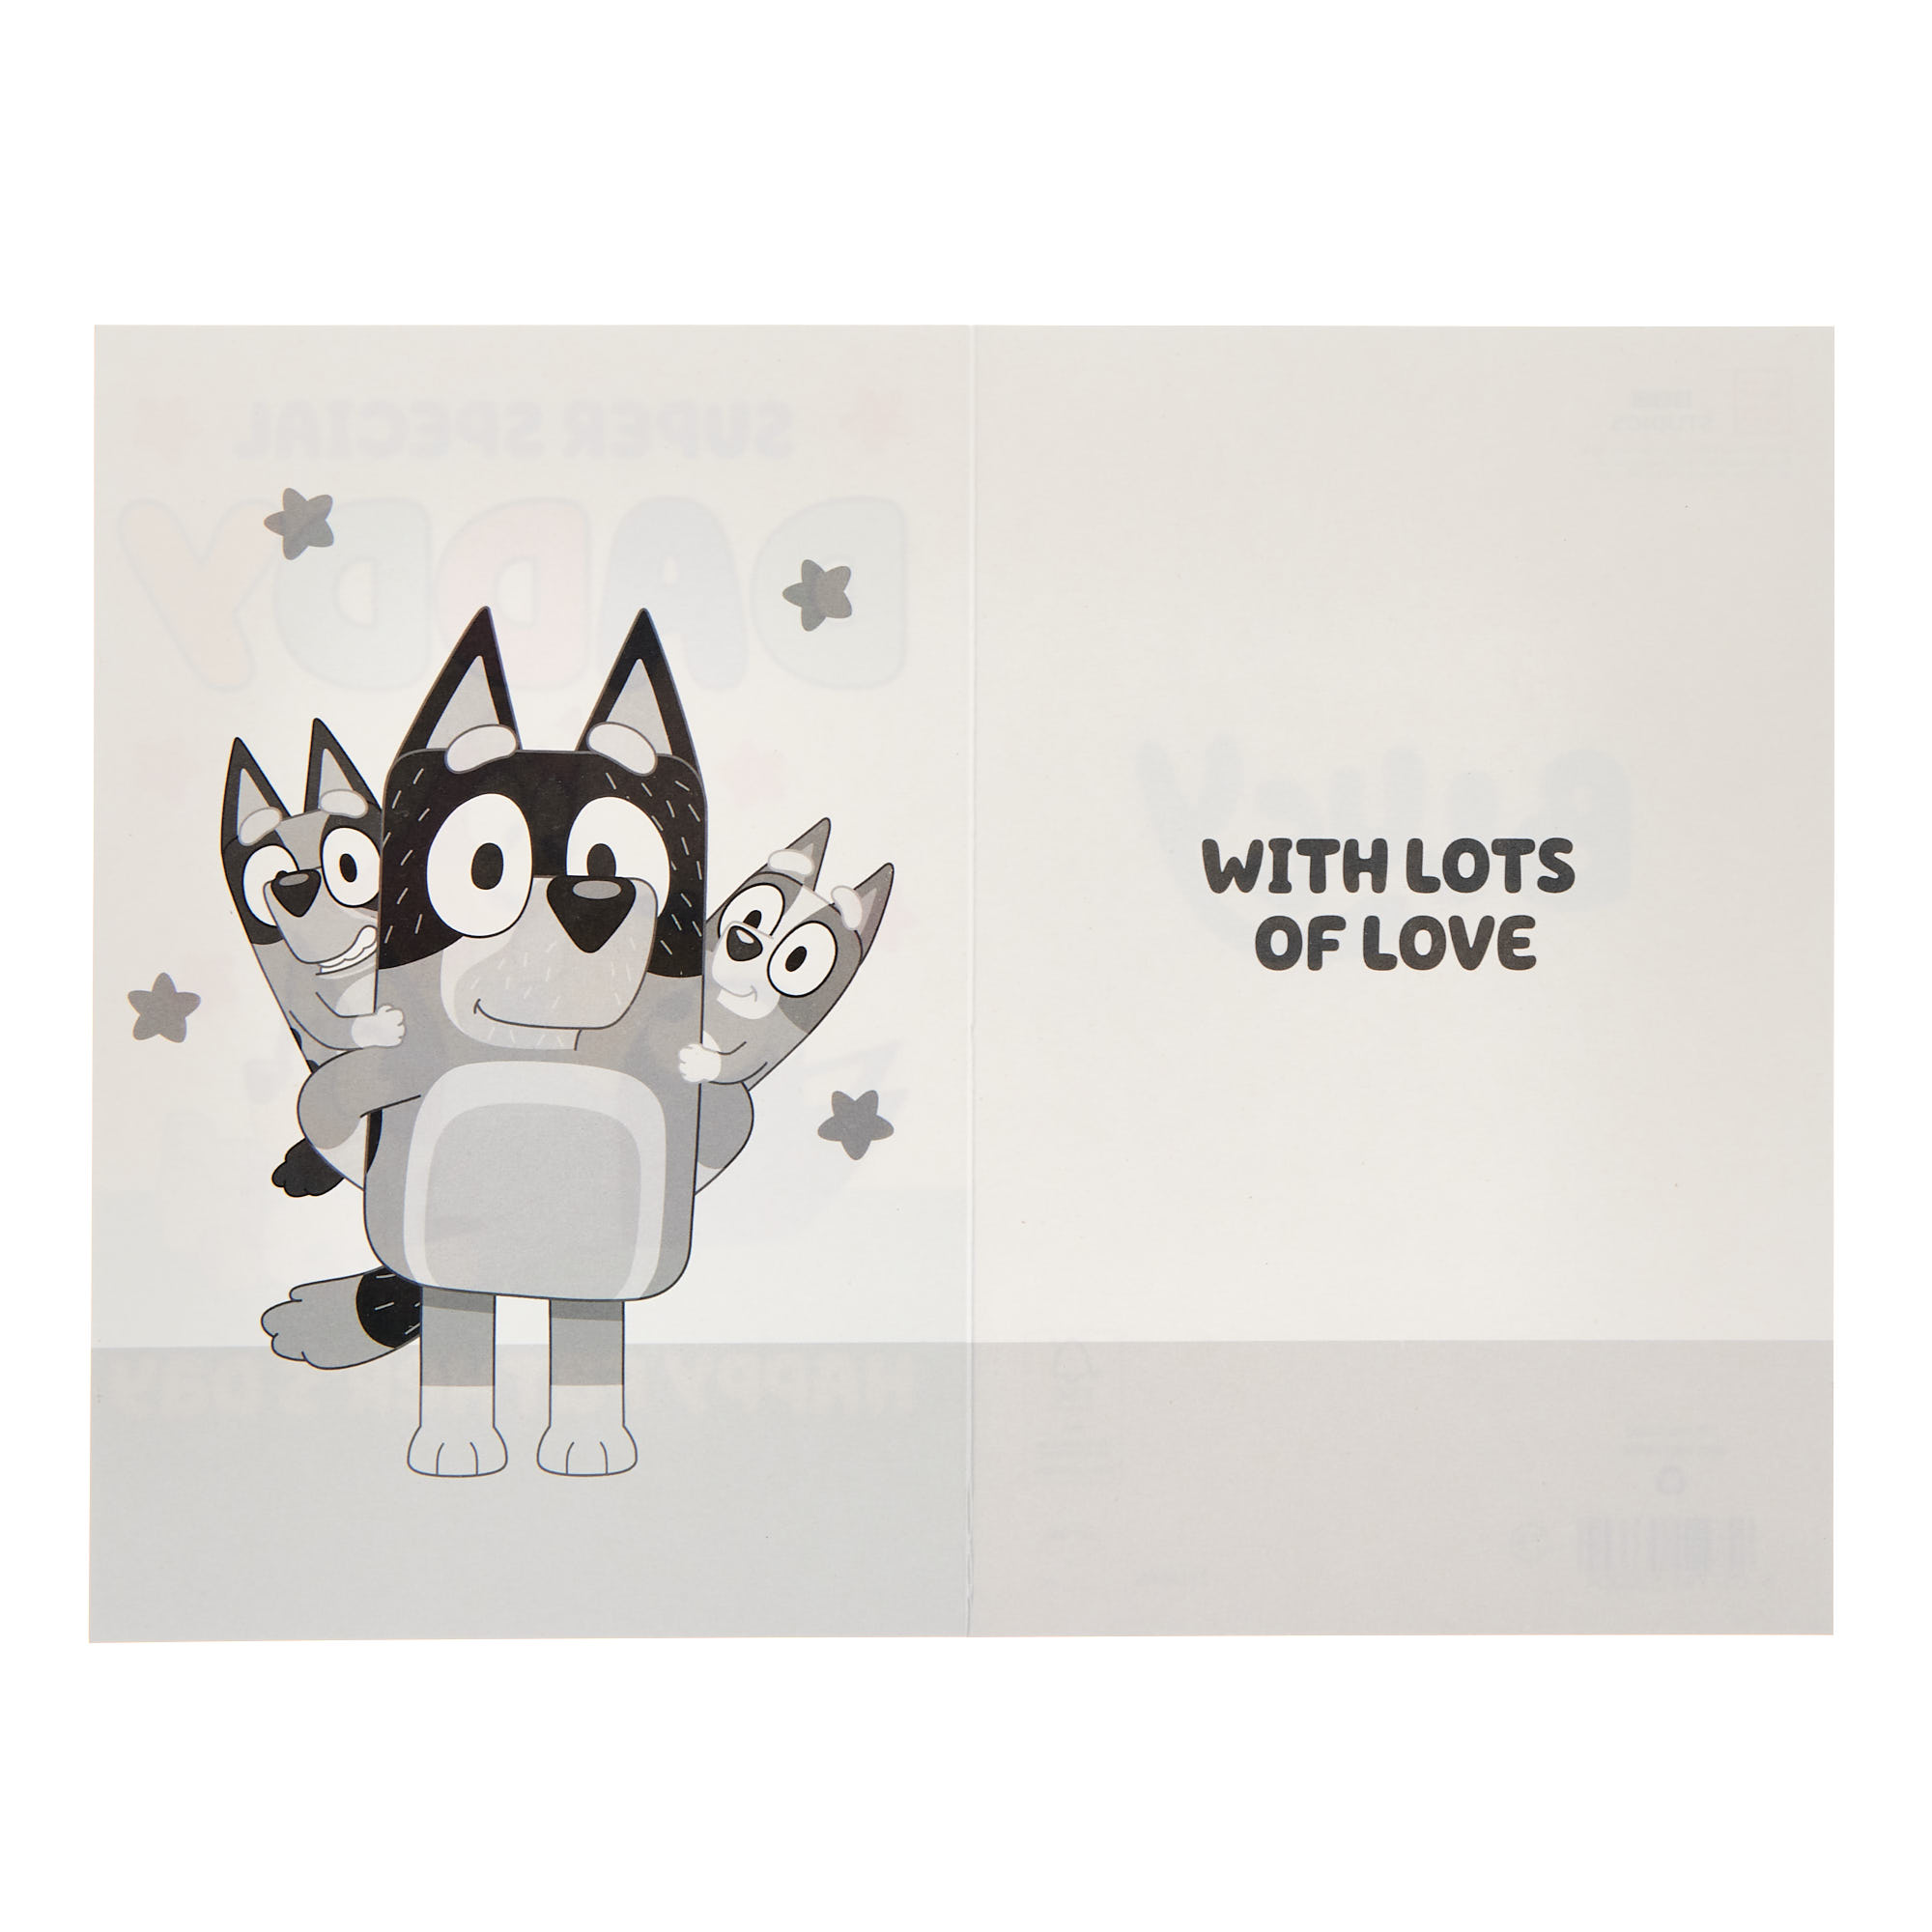 Super Special Daddy Bluey Father's Day Card